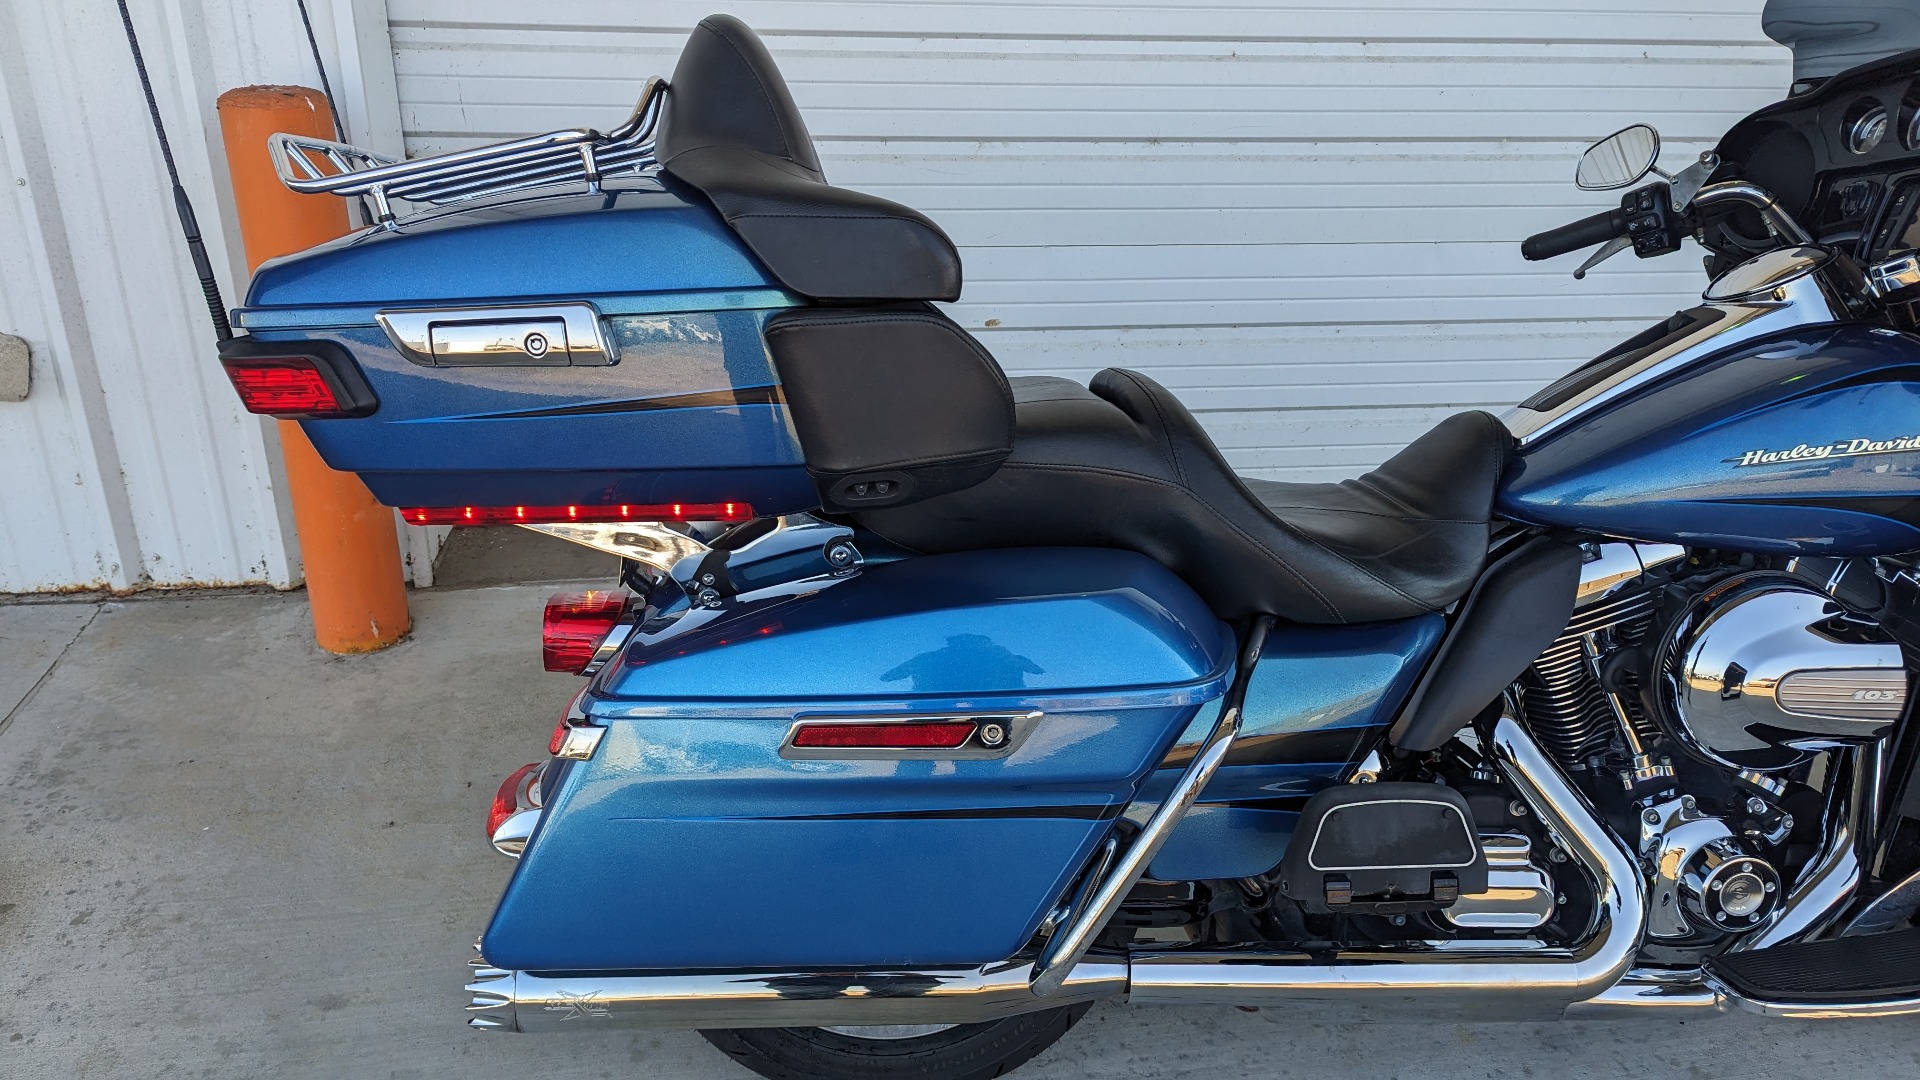 2014 harley davidson ultra limited for sale in little rock - Photo 5